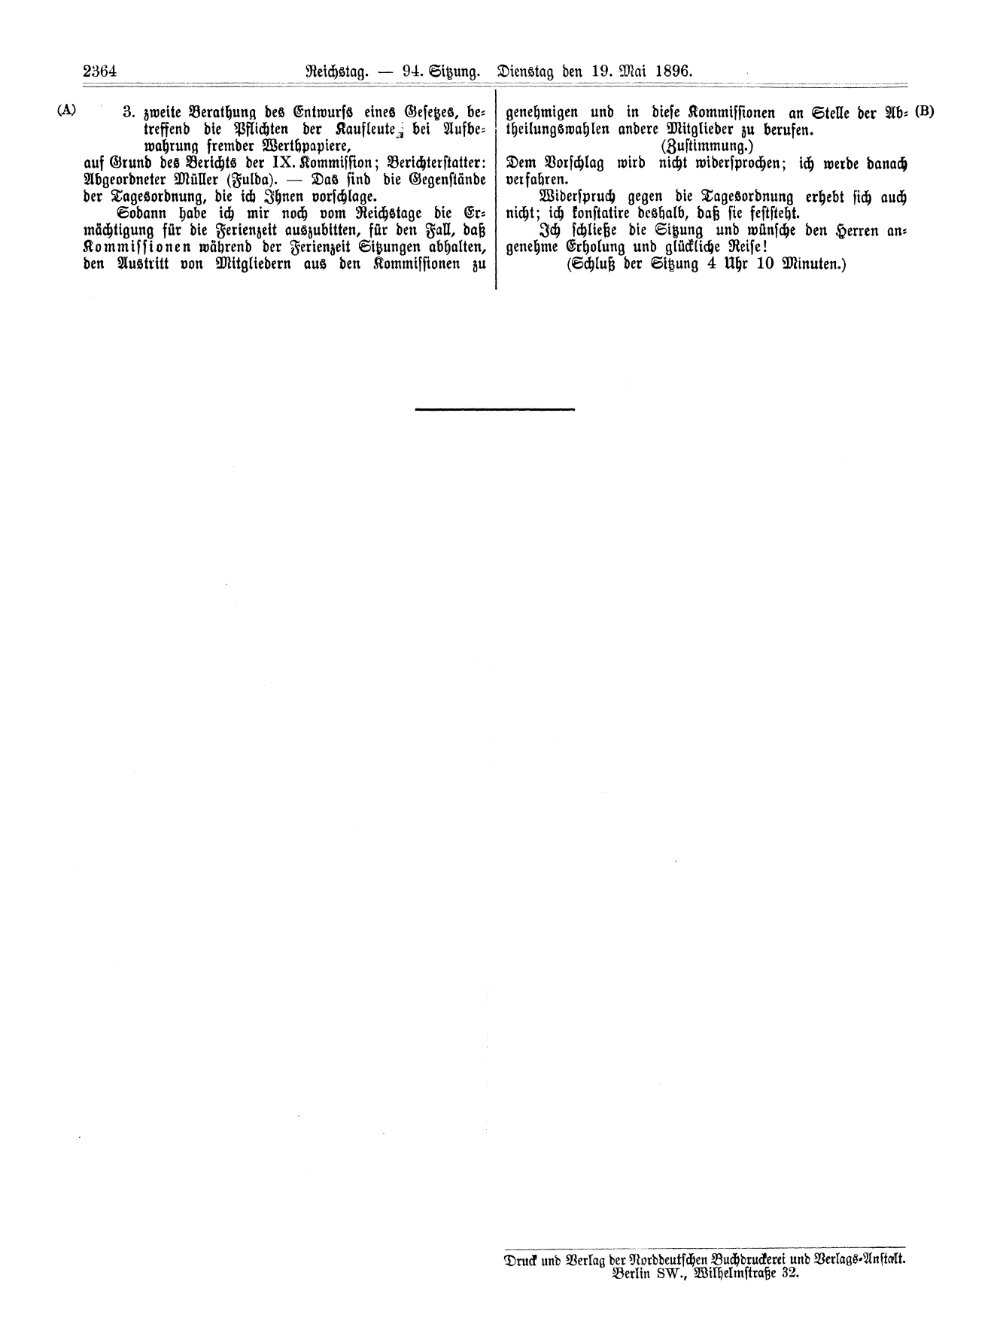 Scan of page 2364